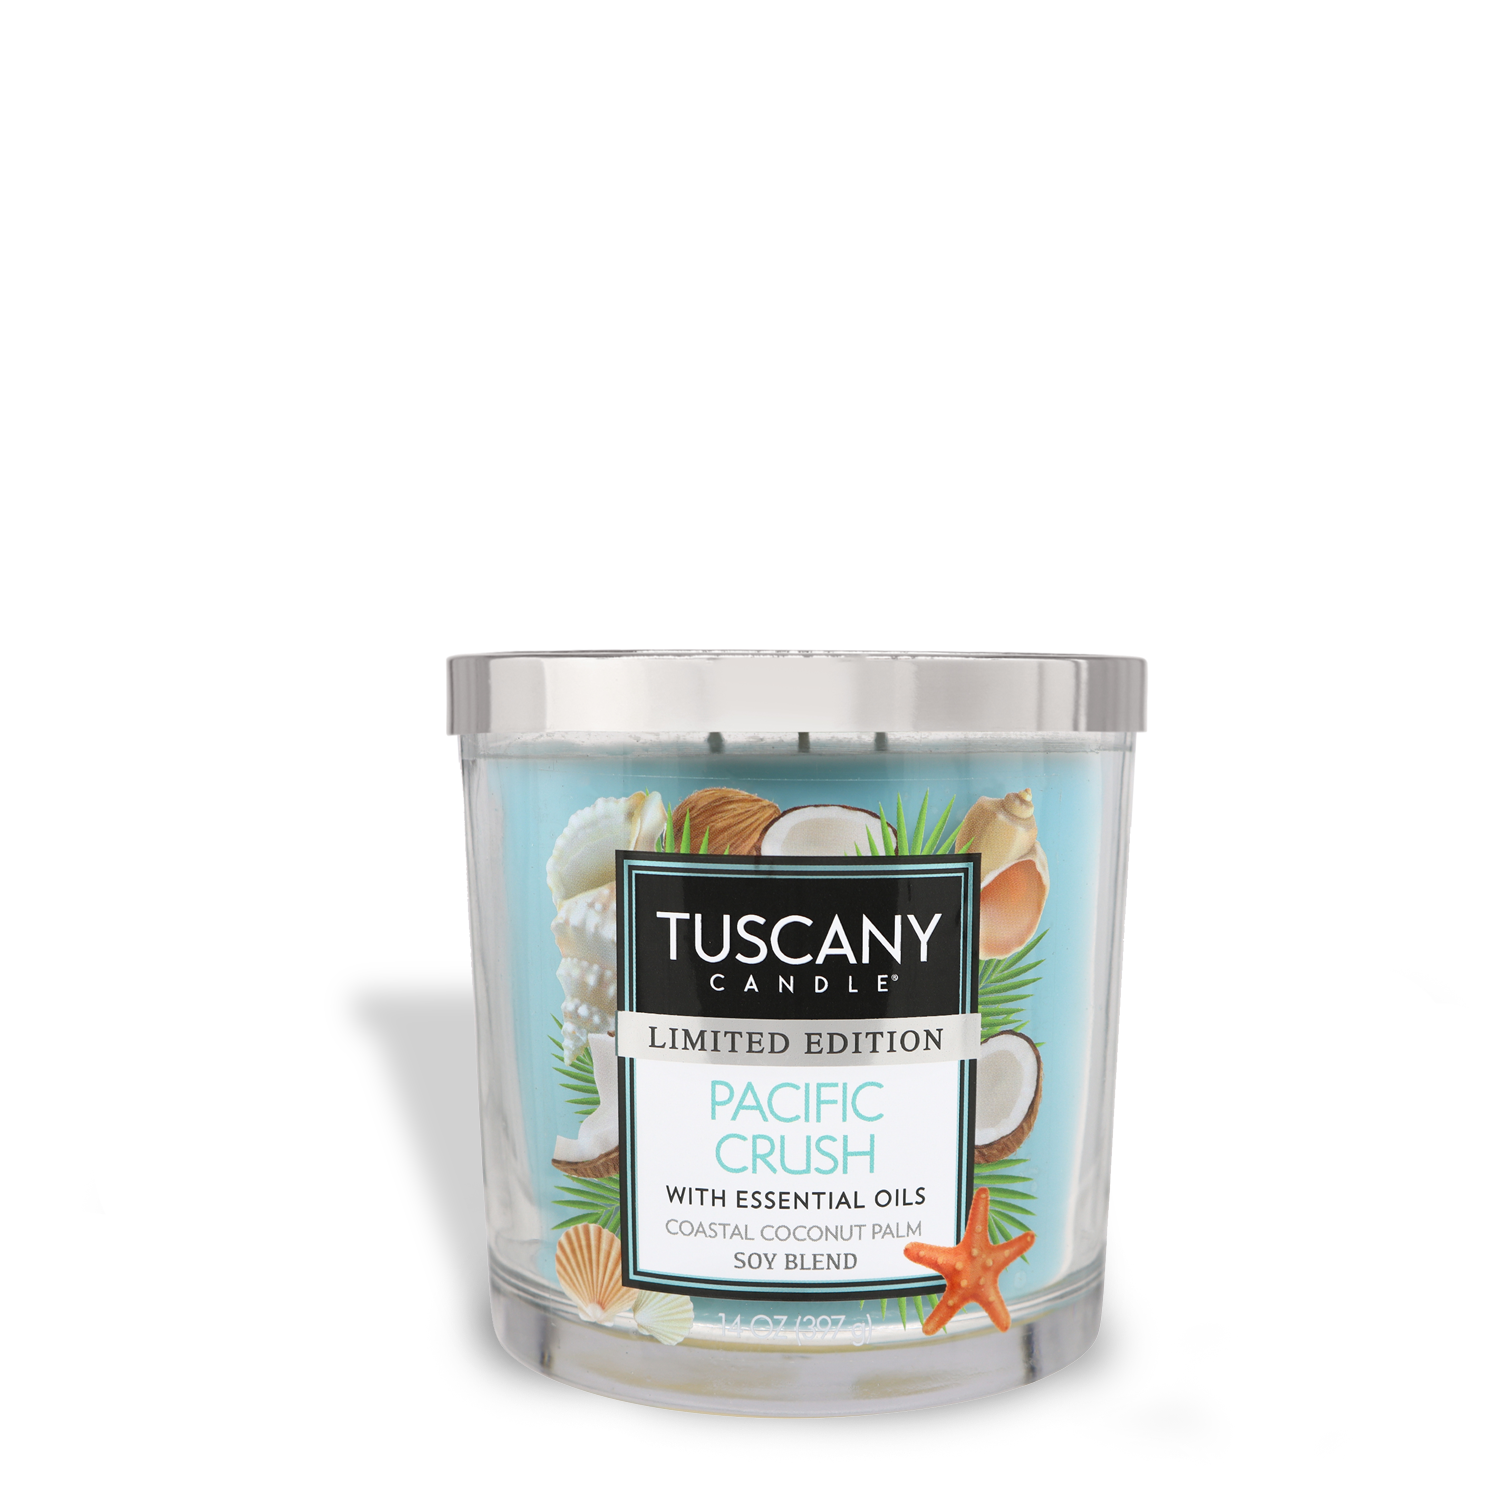 A Tuscany Candle® SEASONAL Pacific Crush Long-Lasting Scented Jar Candle (14 oz) with essential oils, soy coconut palm wax blend.